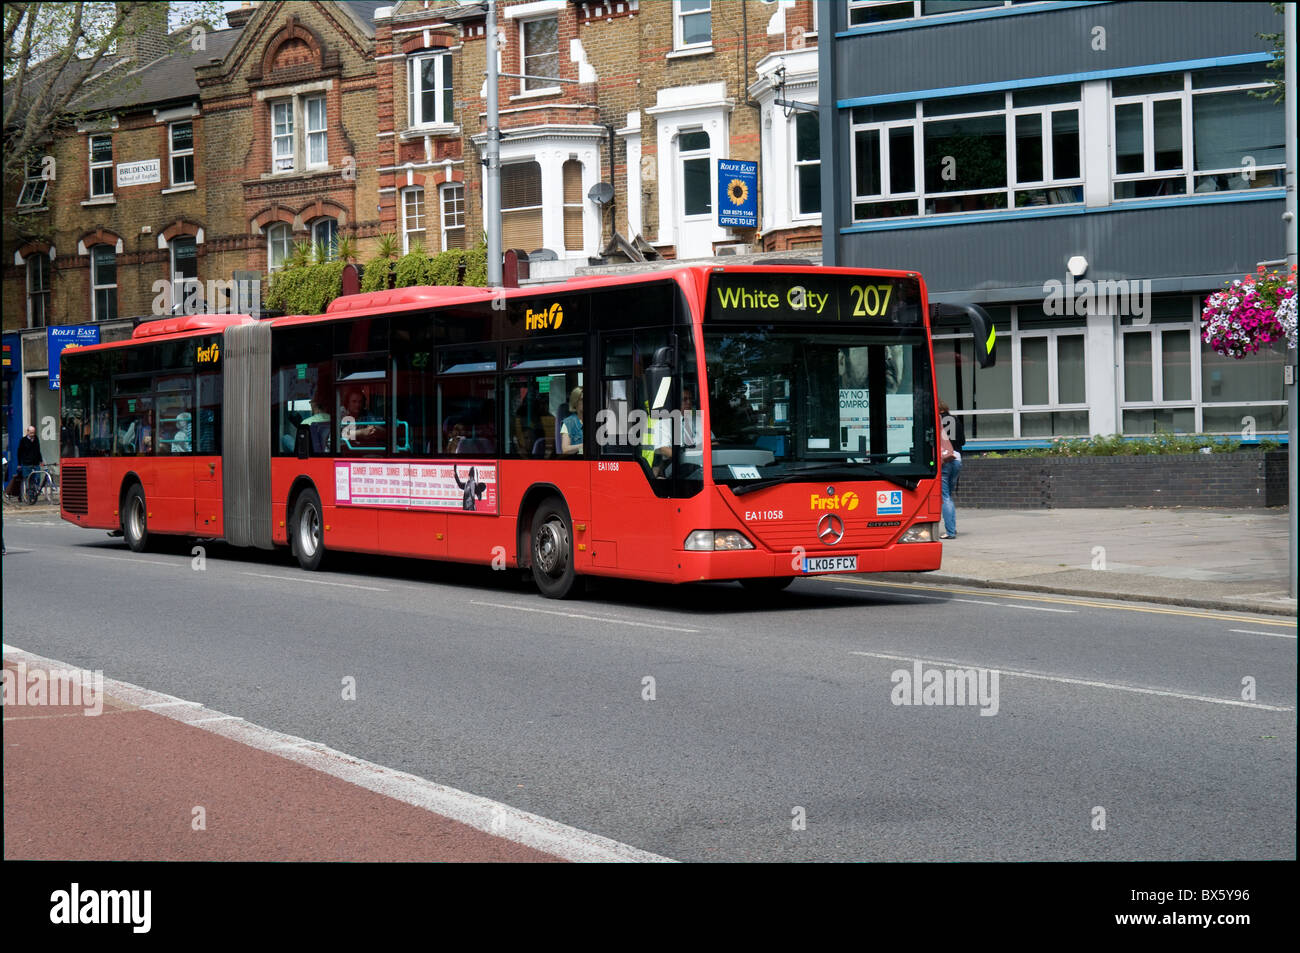 An articulated (bendy) bus passes through Ealing on its way to White City in West London. It is operated by First bus group Stock Photo